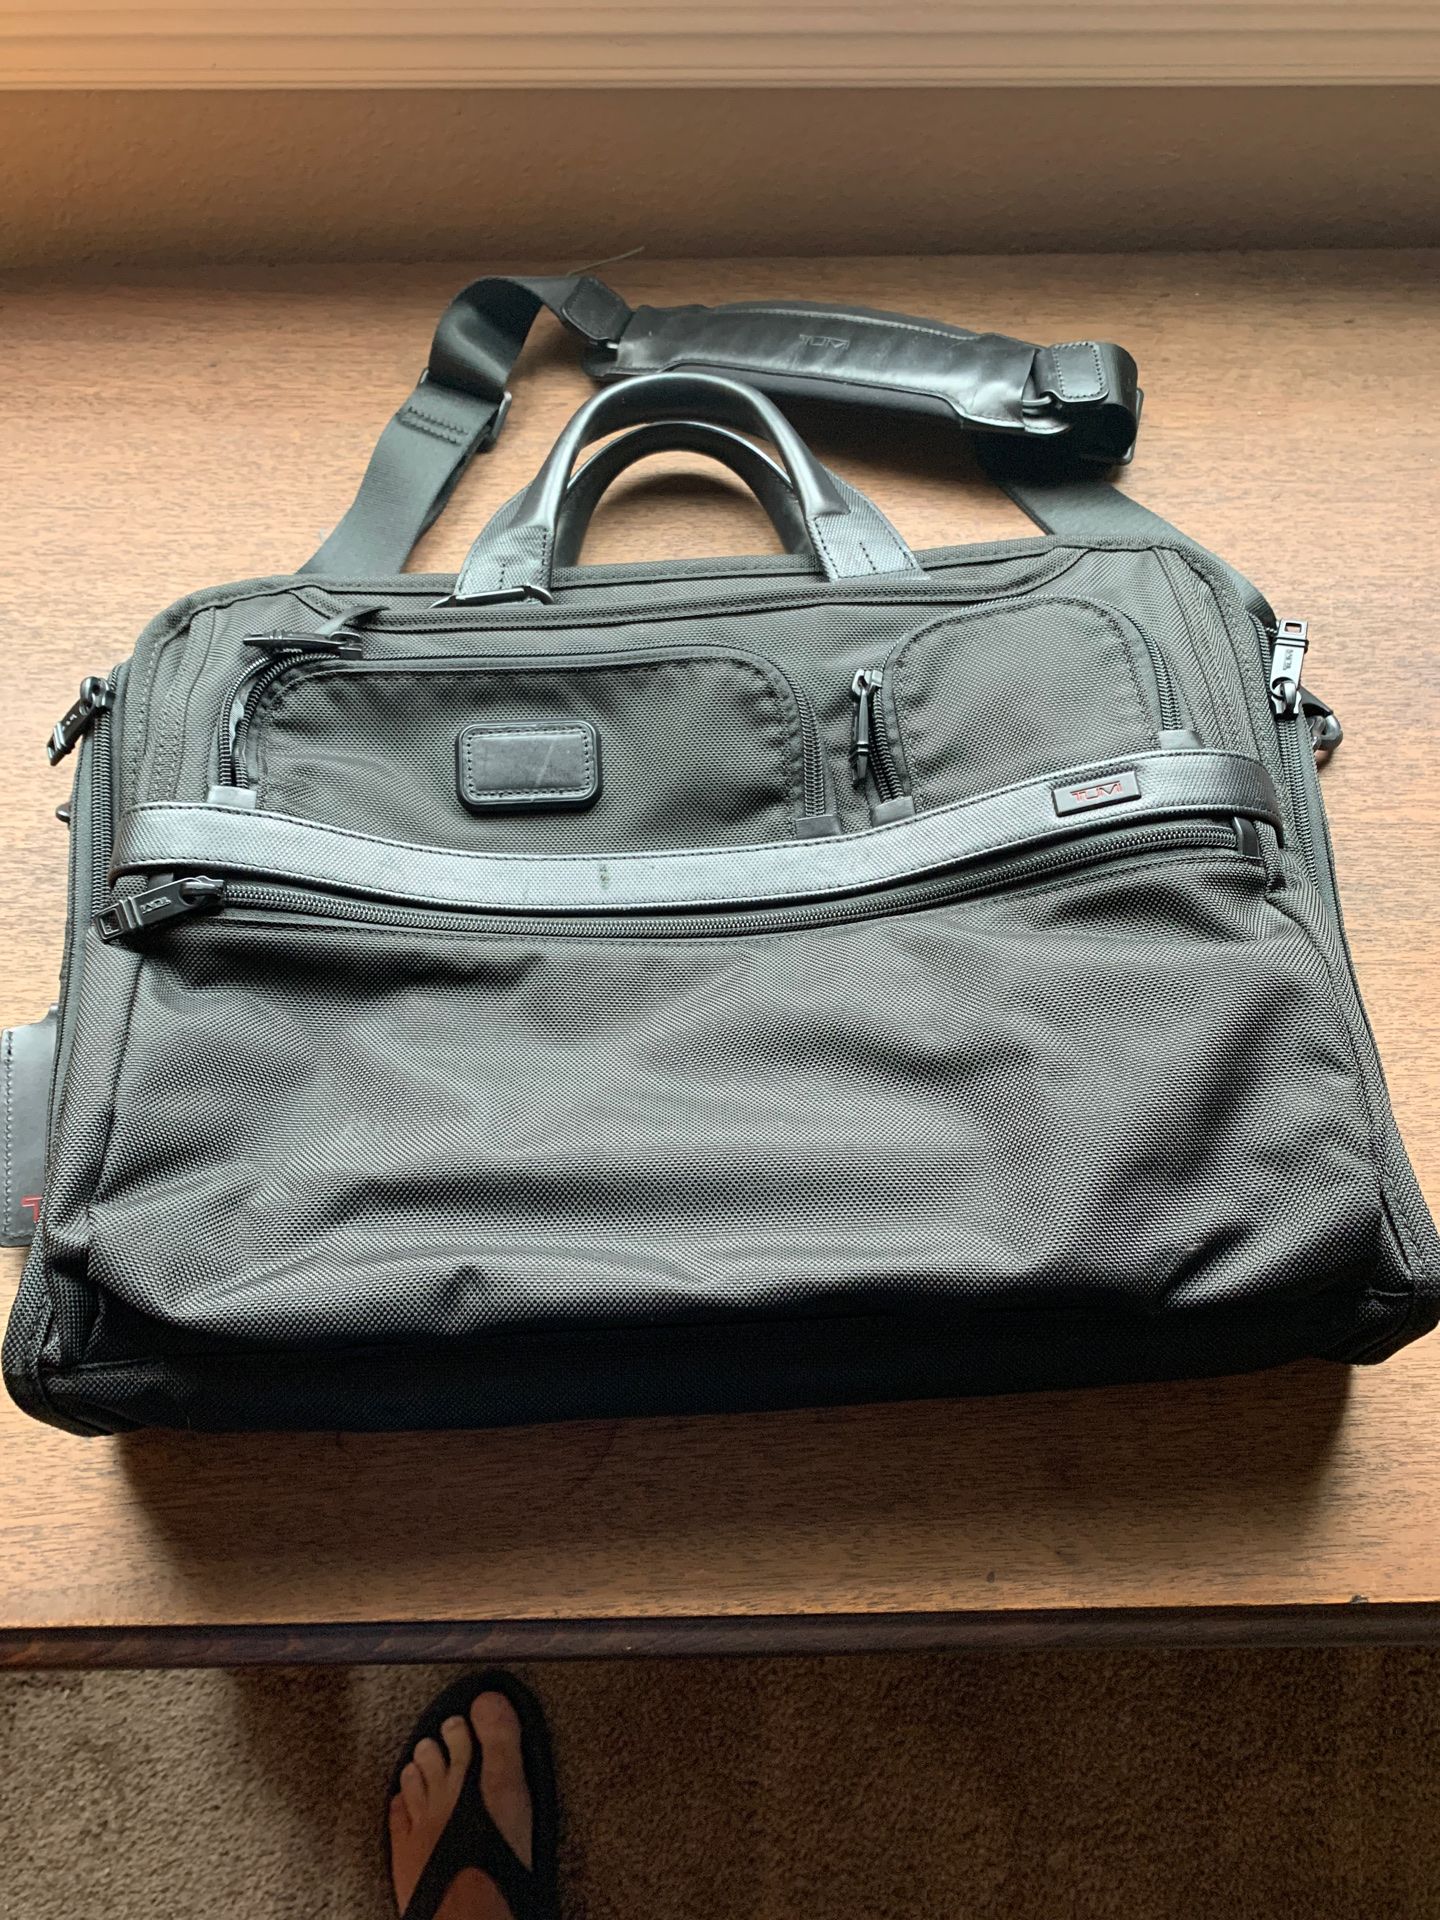 Tumi briefcase bag. This is the larger alpha 3 with laptop compartment. Good shape some minor scuffs from normal ware.